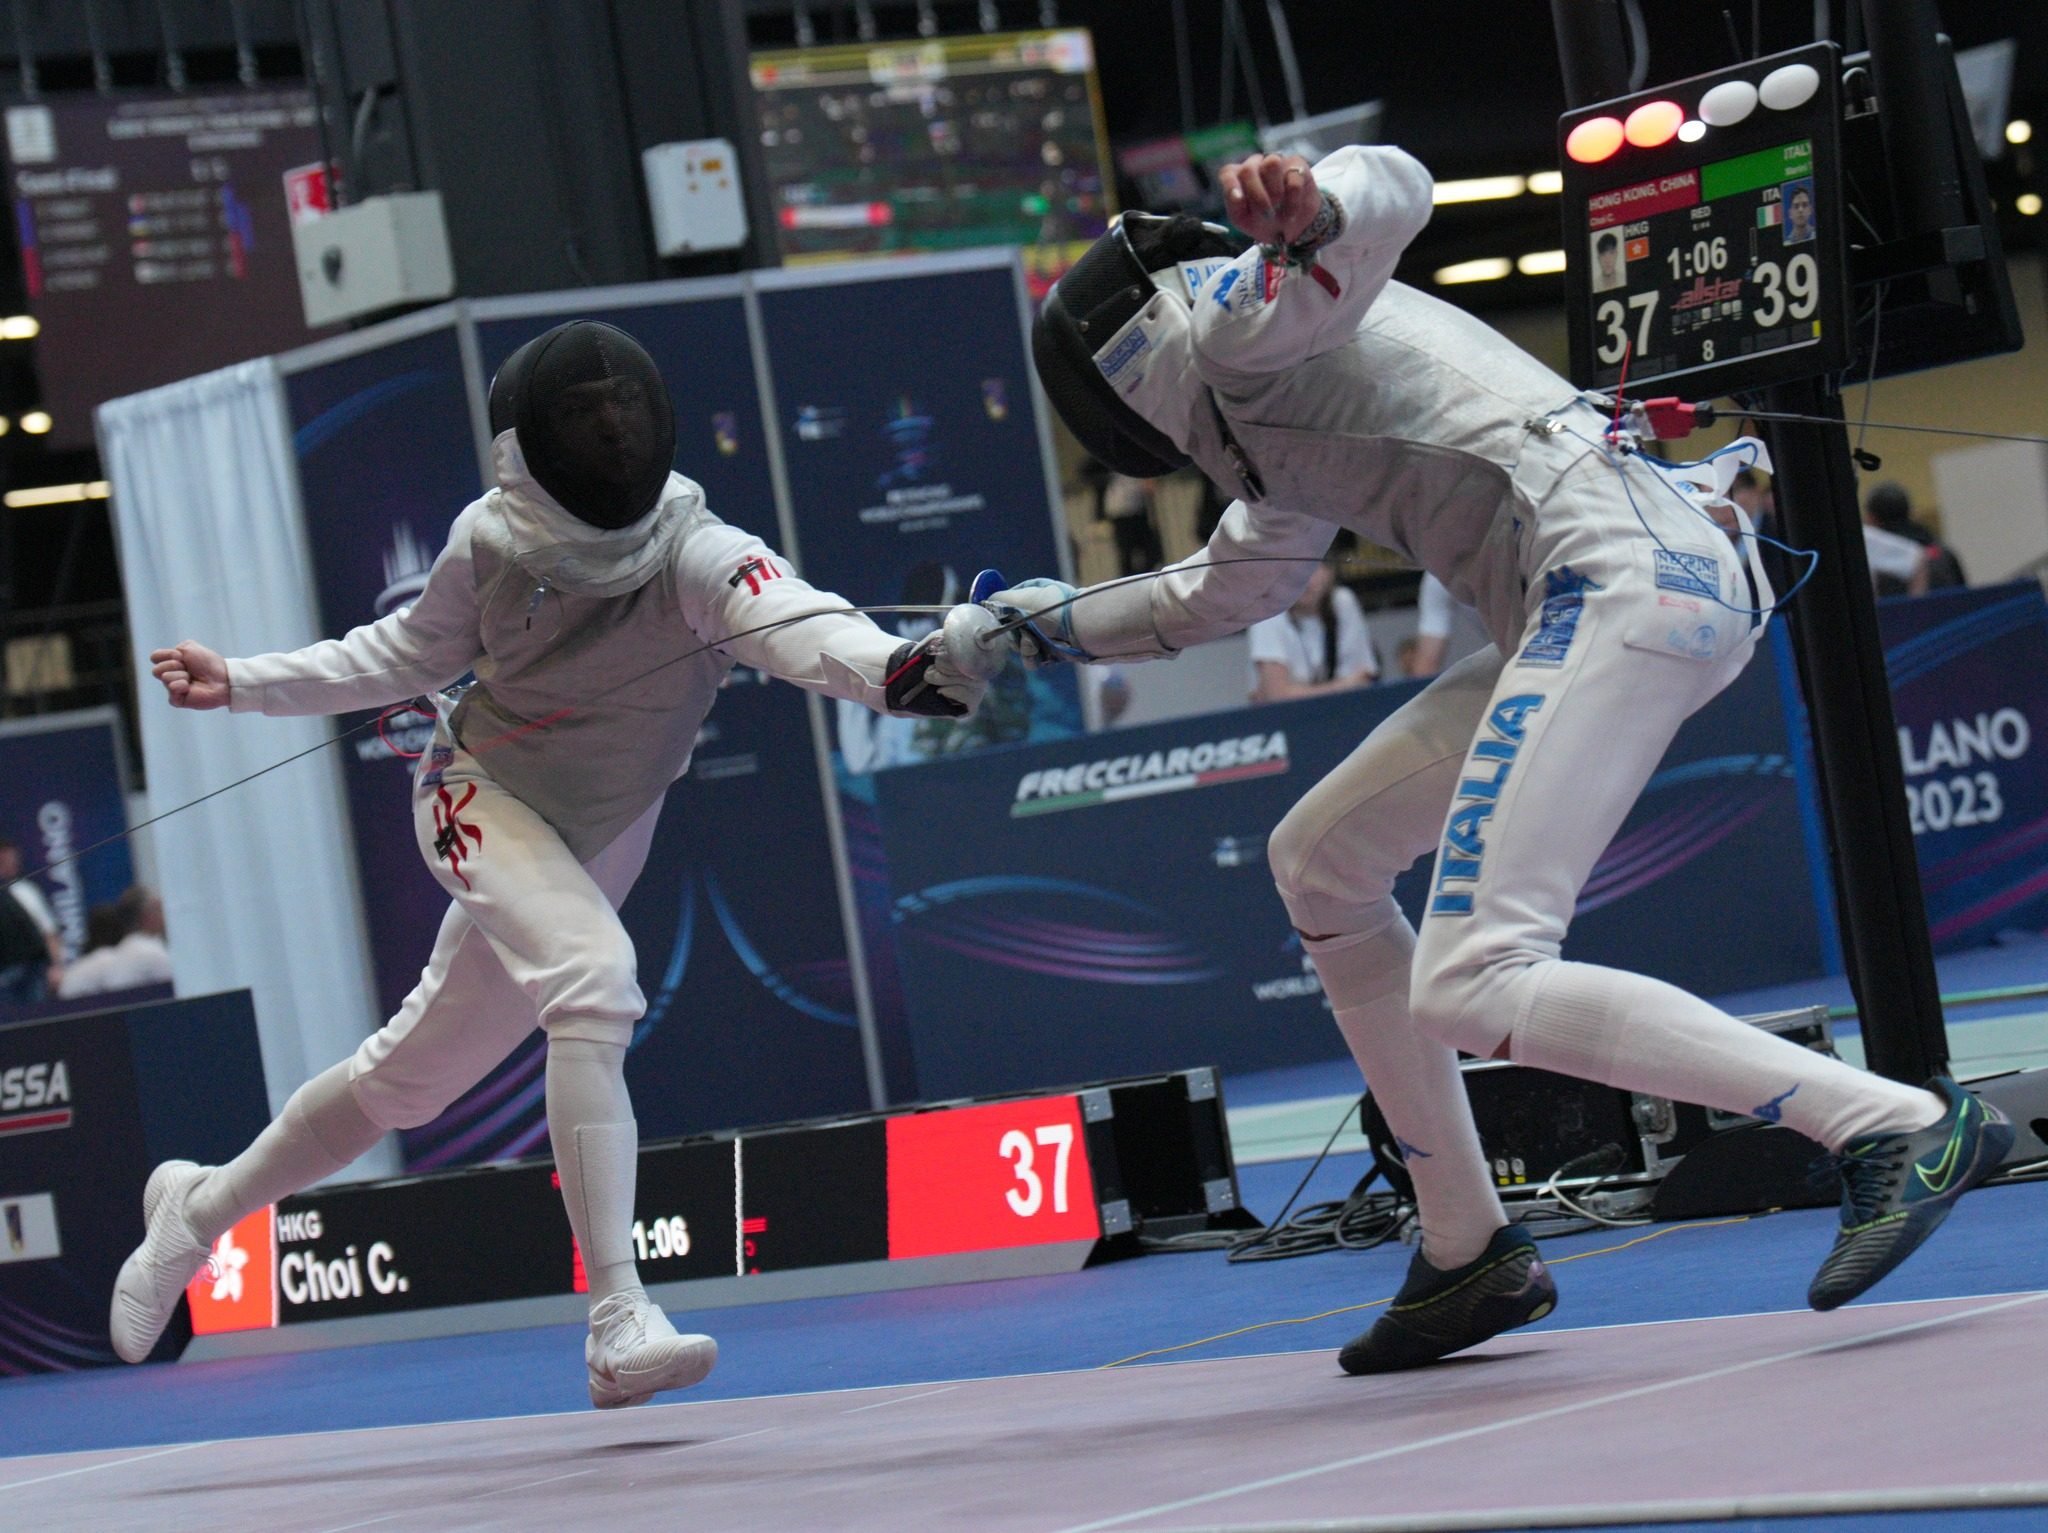 Ryan Choi (left) produced a brilliant display against Italy in the men’s team foil semi-finals at the World Championships in Milan. Photo: FIE